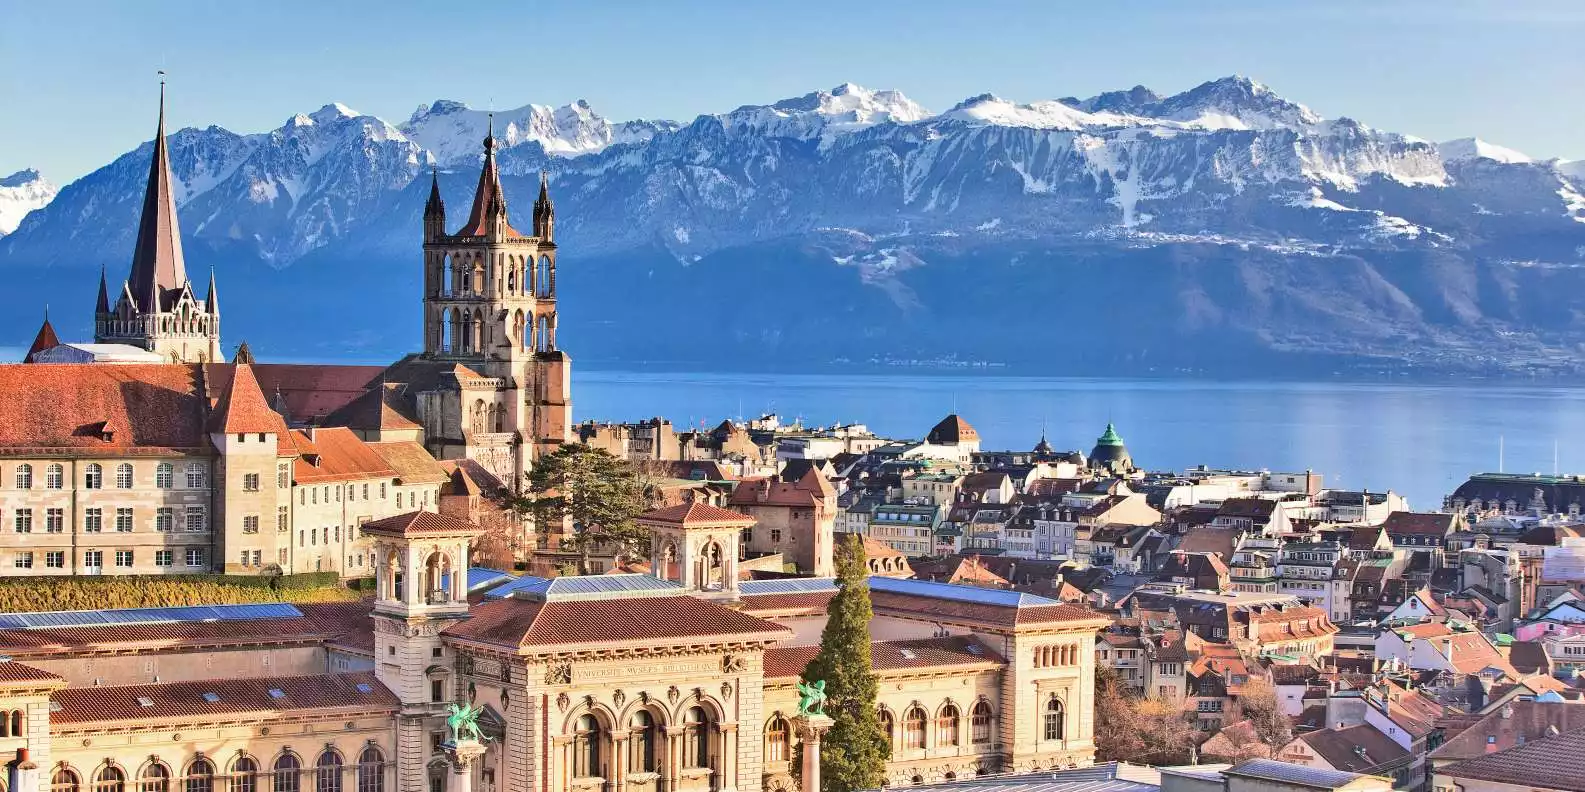 Bus Round Trip to Lausanne from Geneva | GetYourGuide